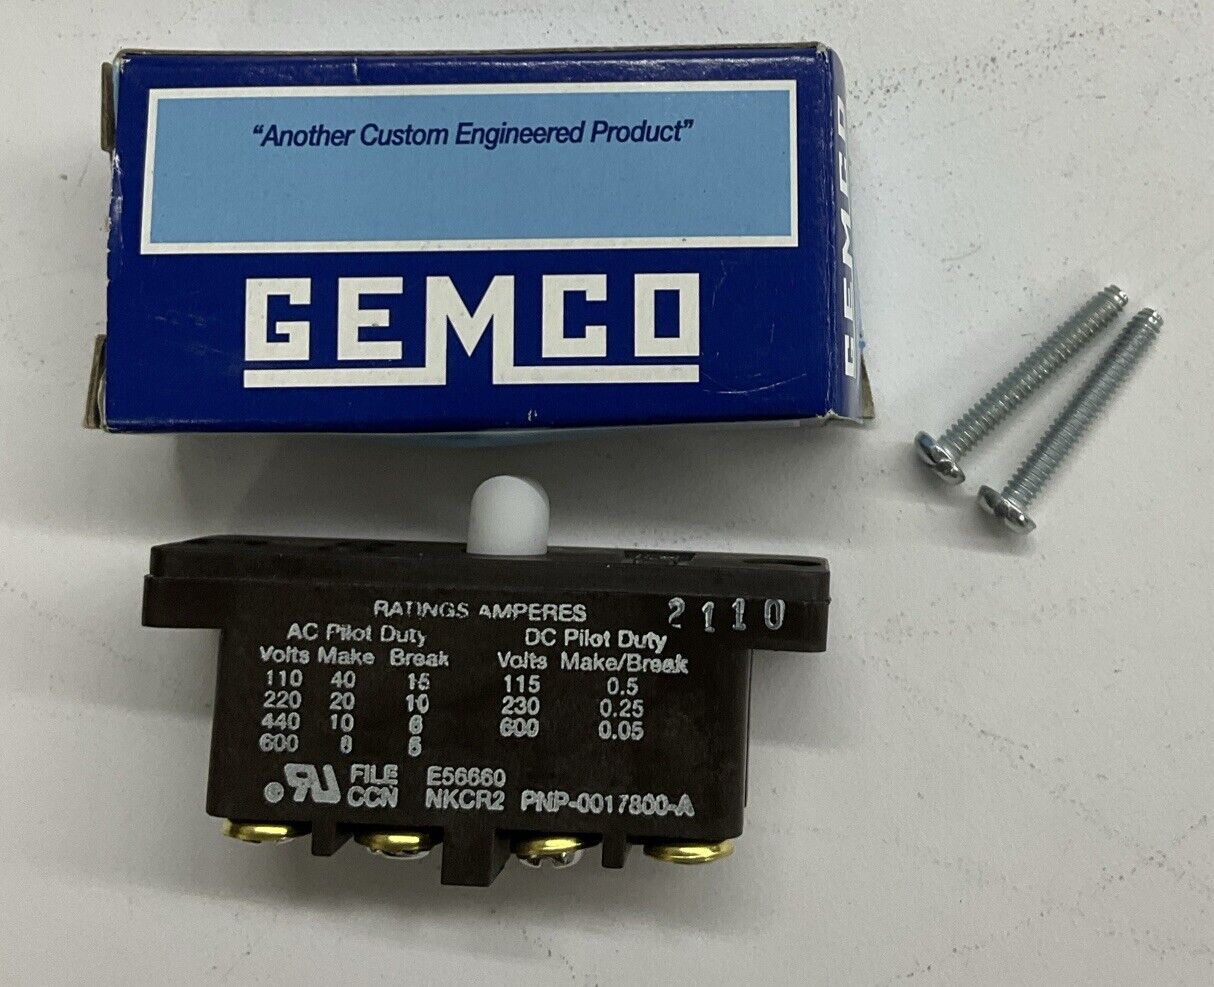 Gemco 19504BAA0 Double Pole, Double Throw Switch (CL369) - 0